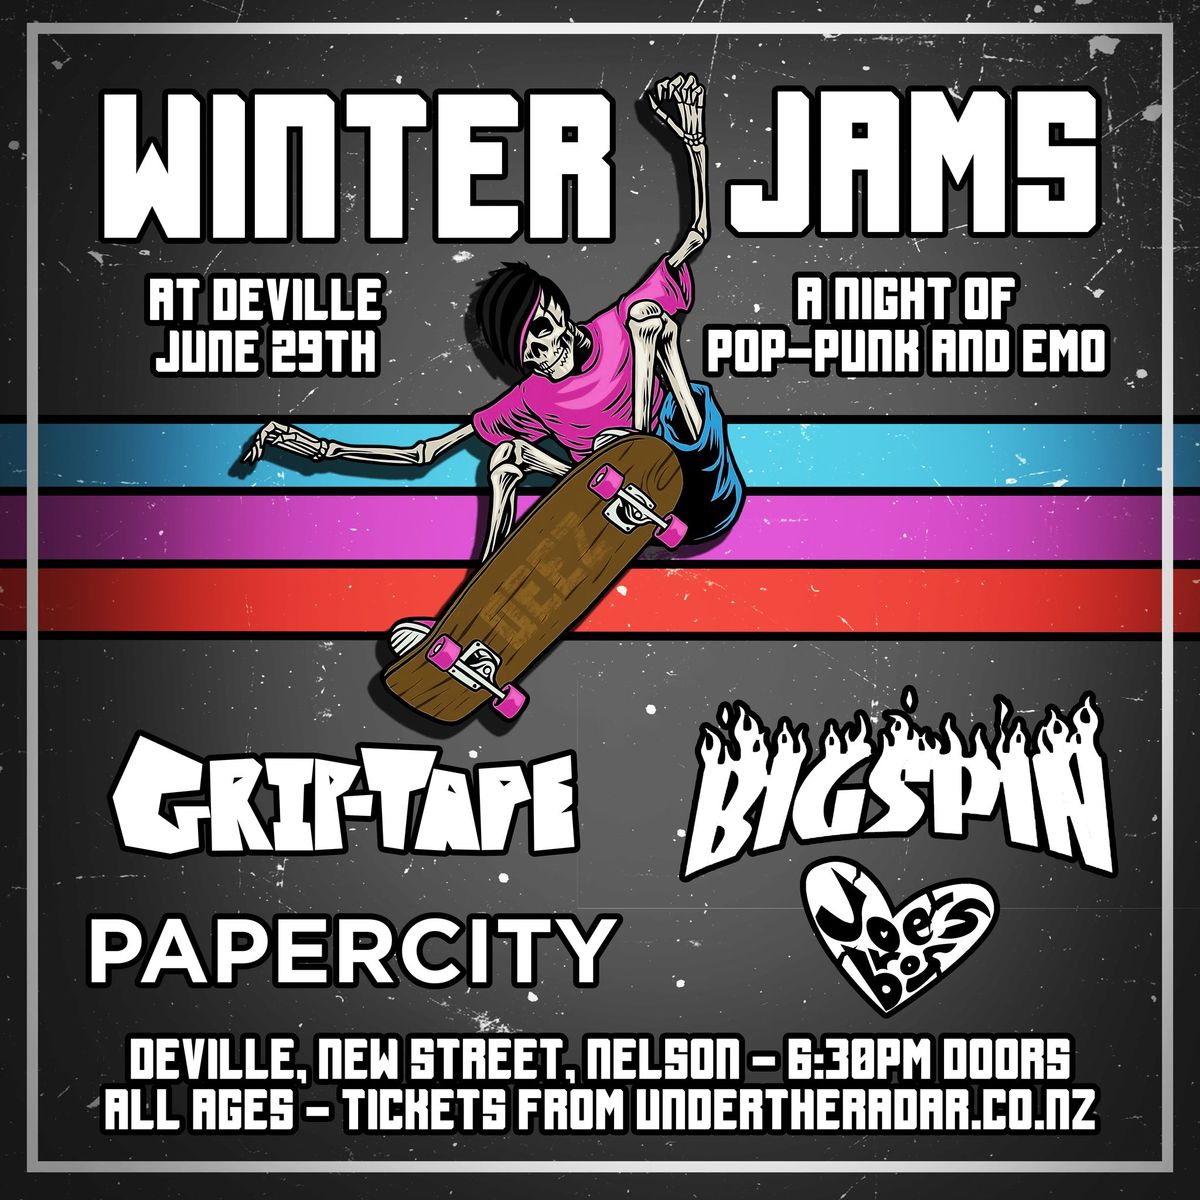 WINTER JAMS - A night of Pop-Punk and Emo